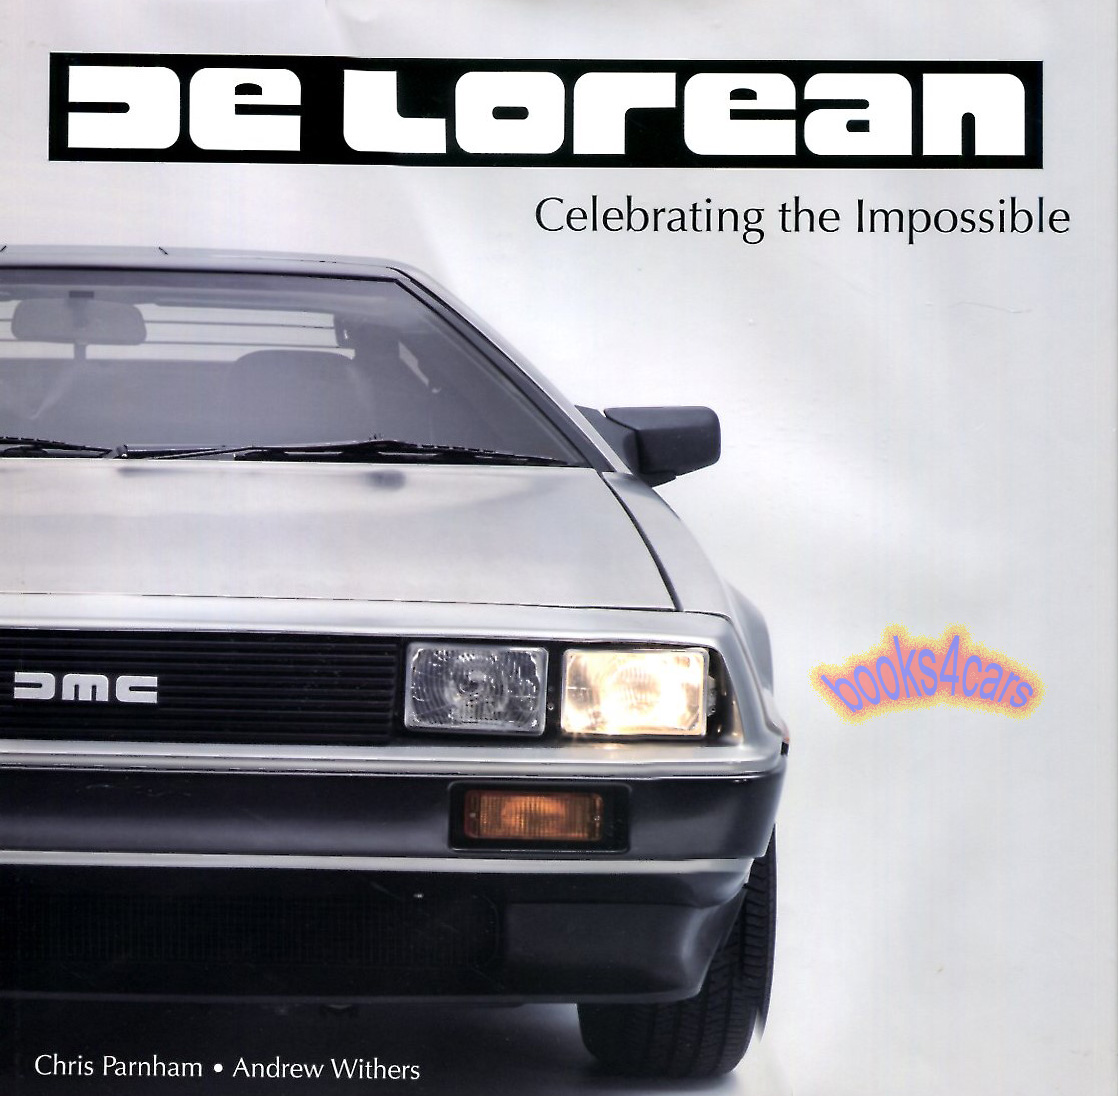 Delorean Celebrating the Impossible by Parnham & Withers